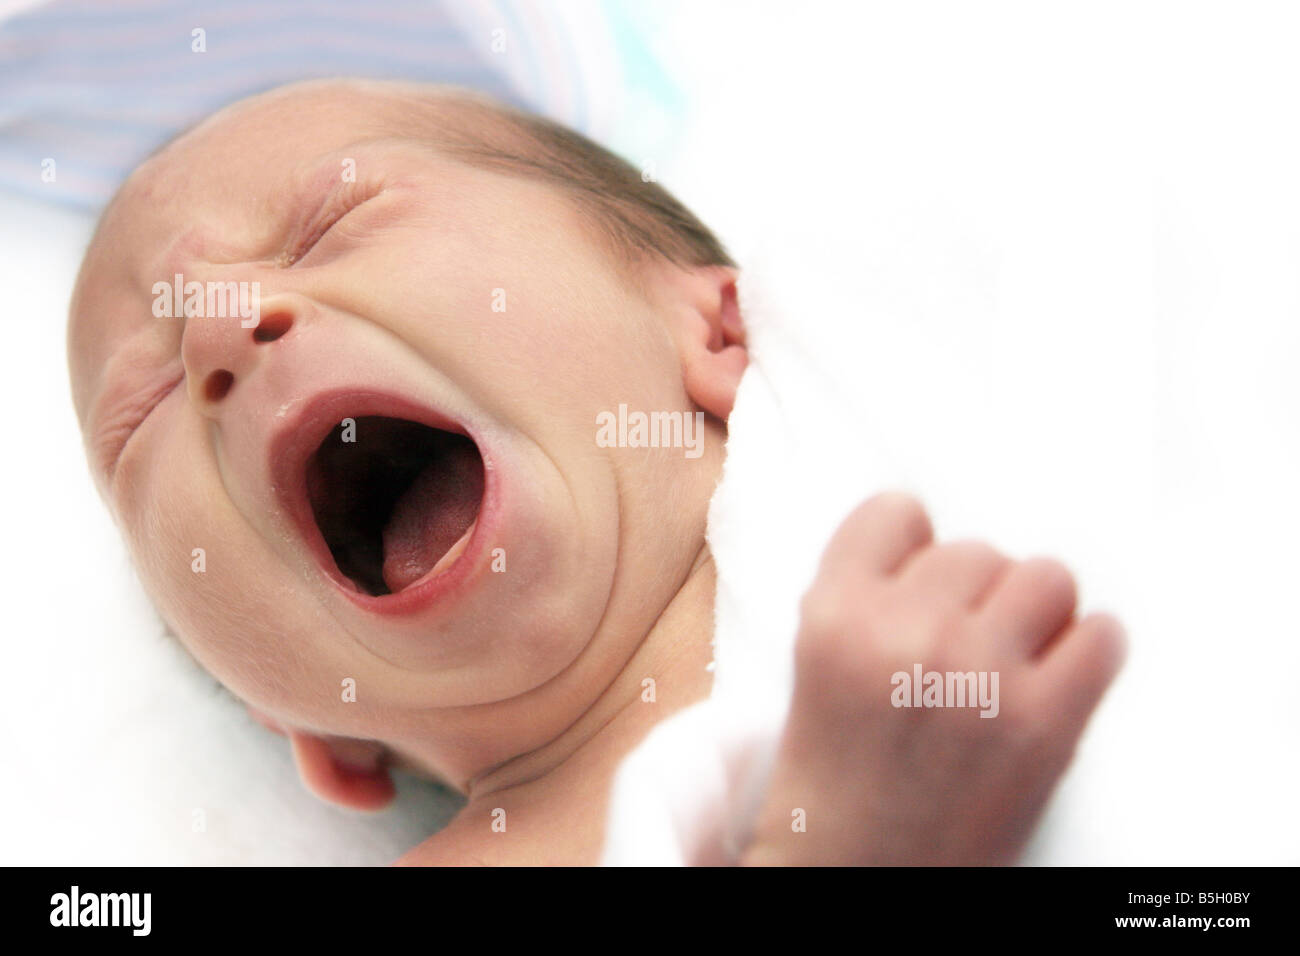 Crying baby on his first day Stock Photo